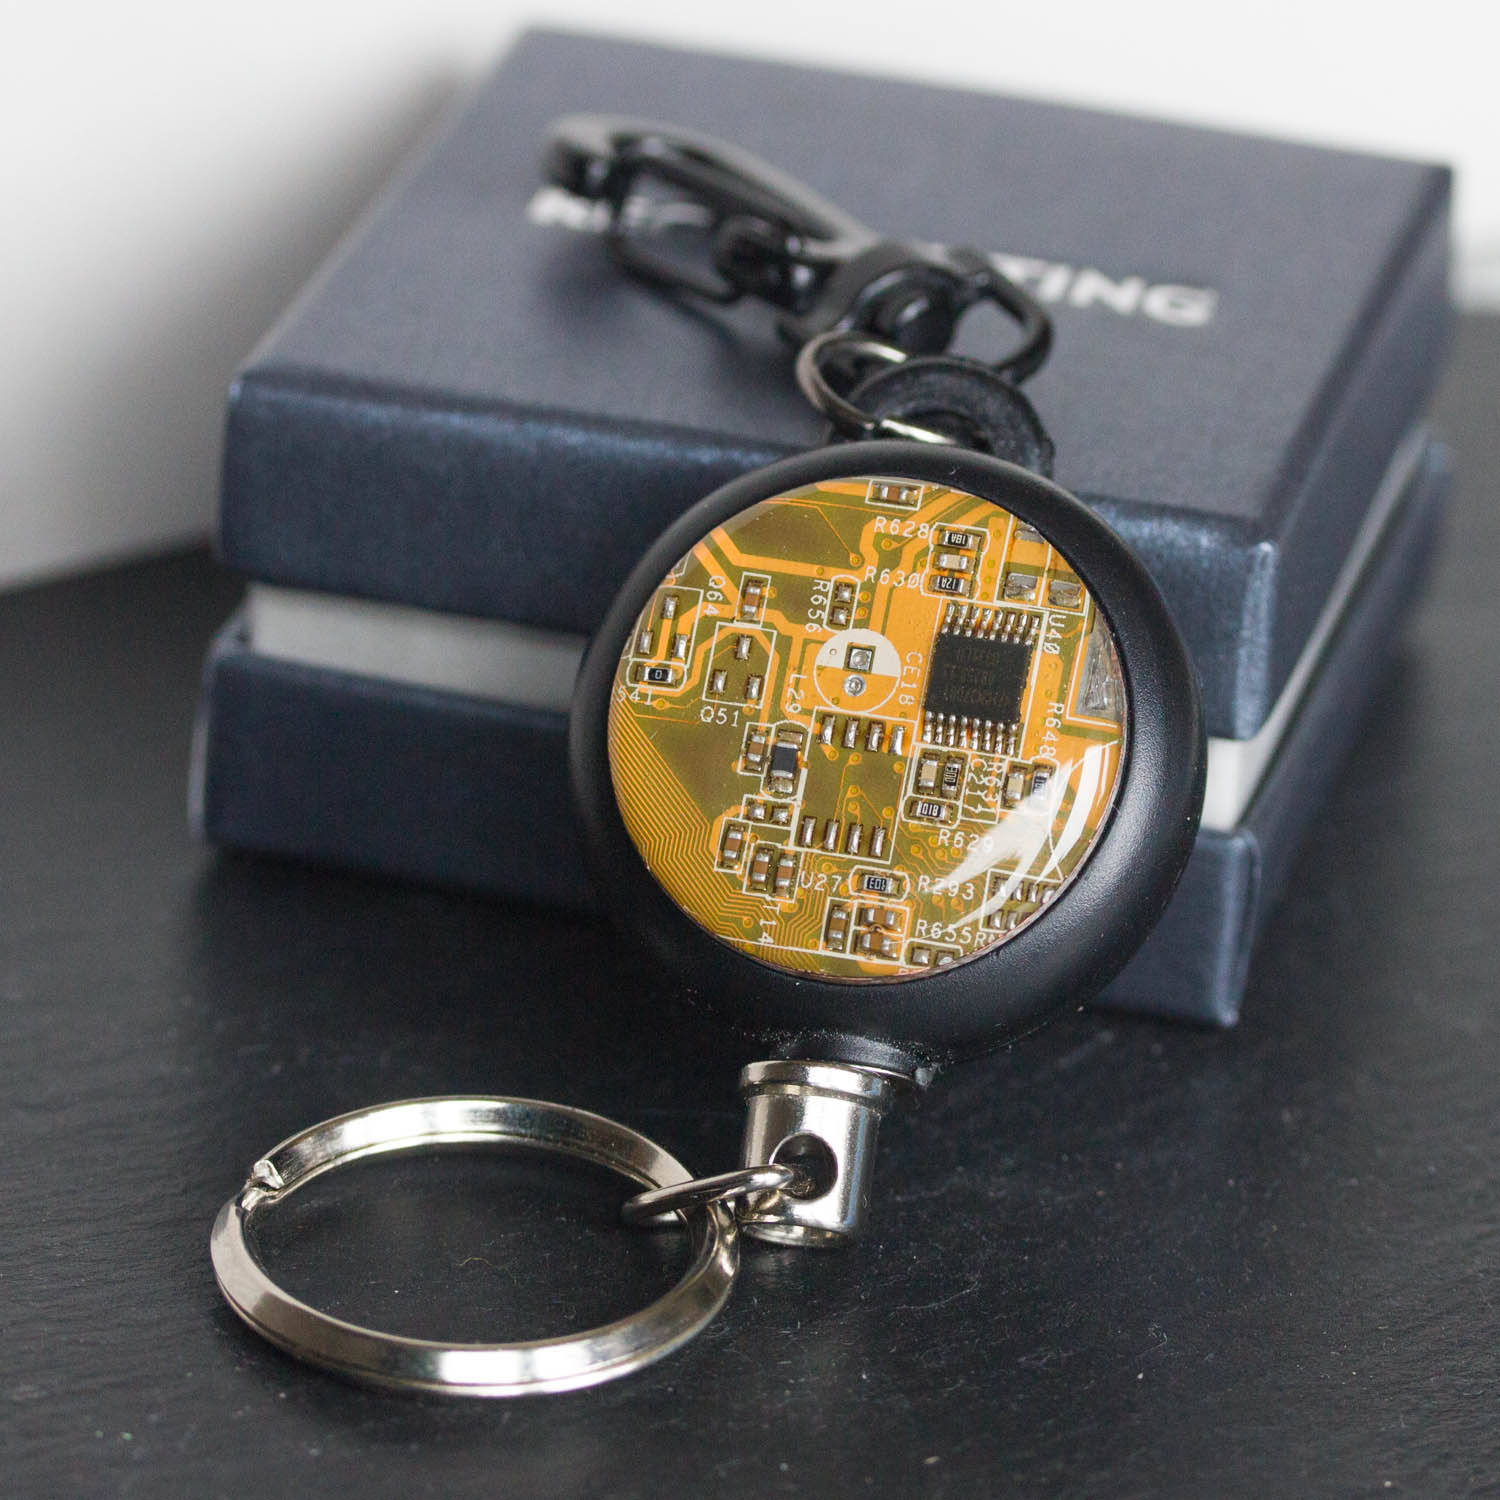 Retractable badge holder with a circuit board piece